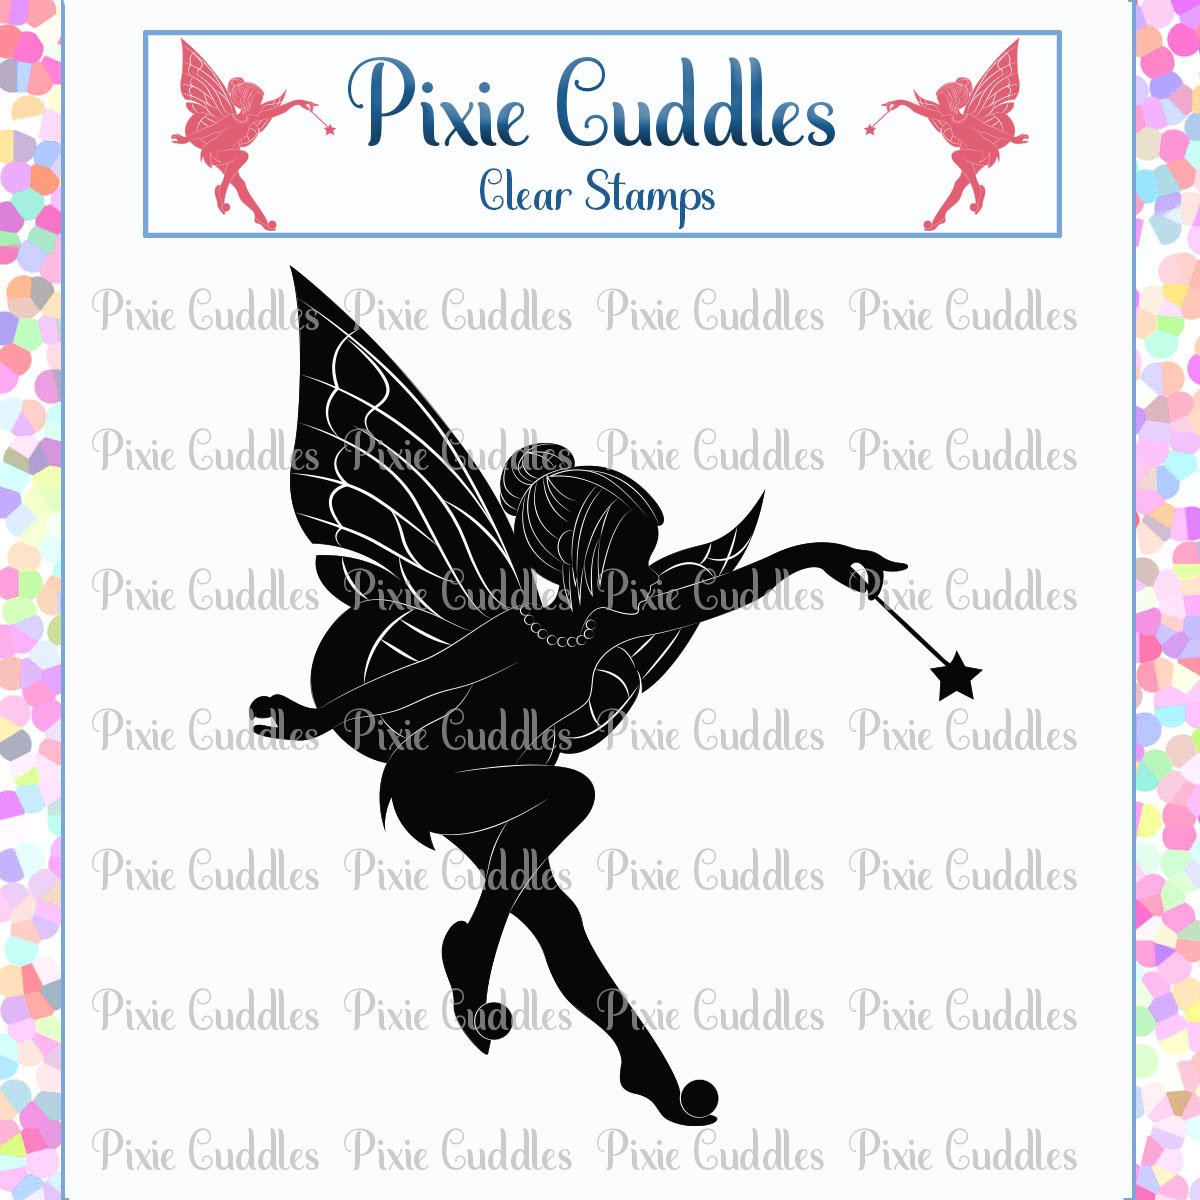 Pixie Cuddles - Clear Stamps - Jellylight